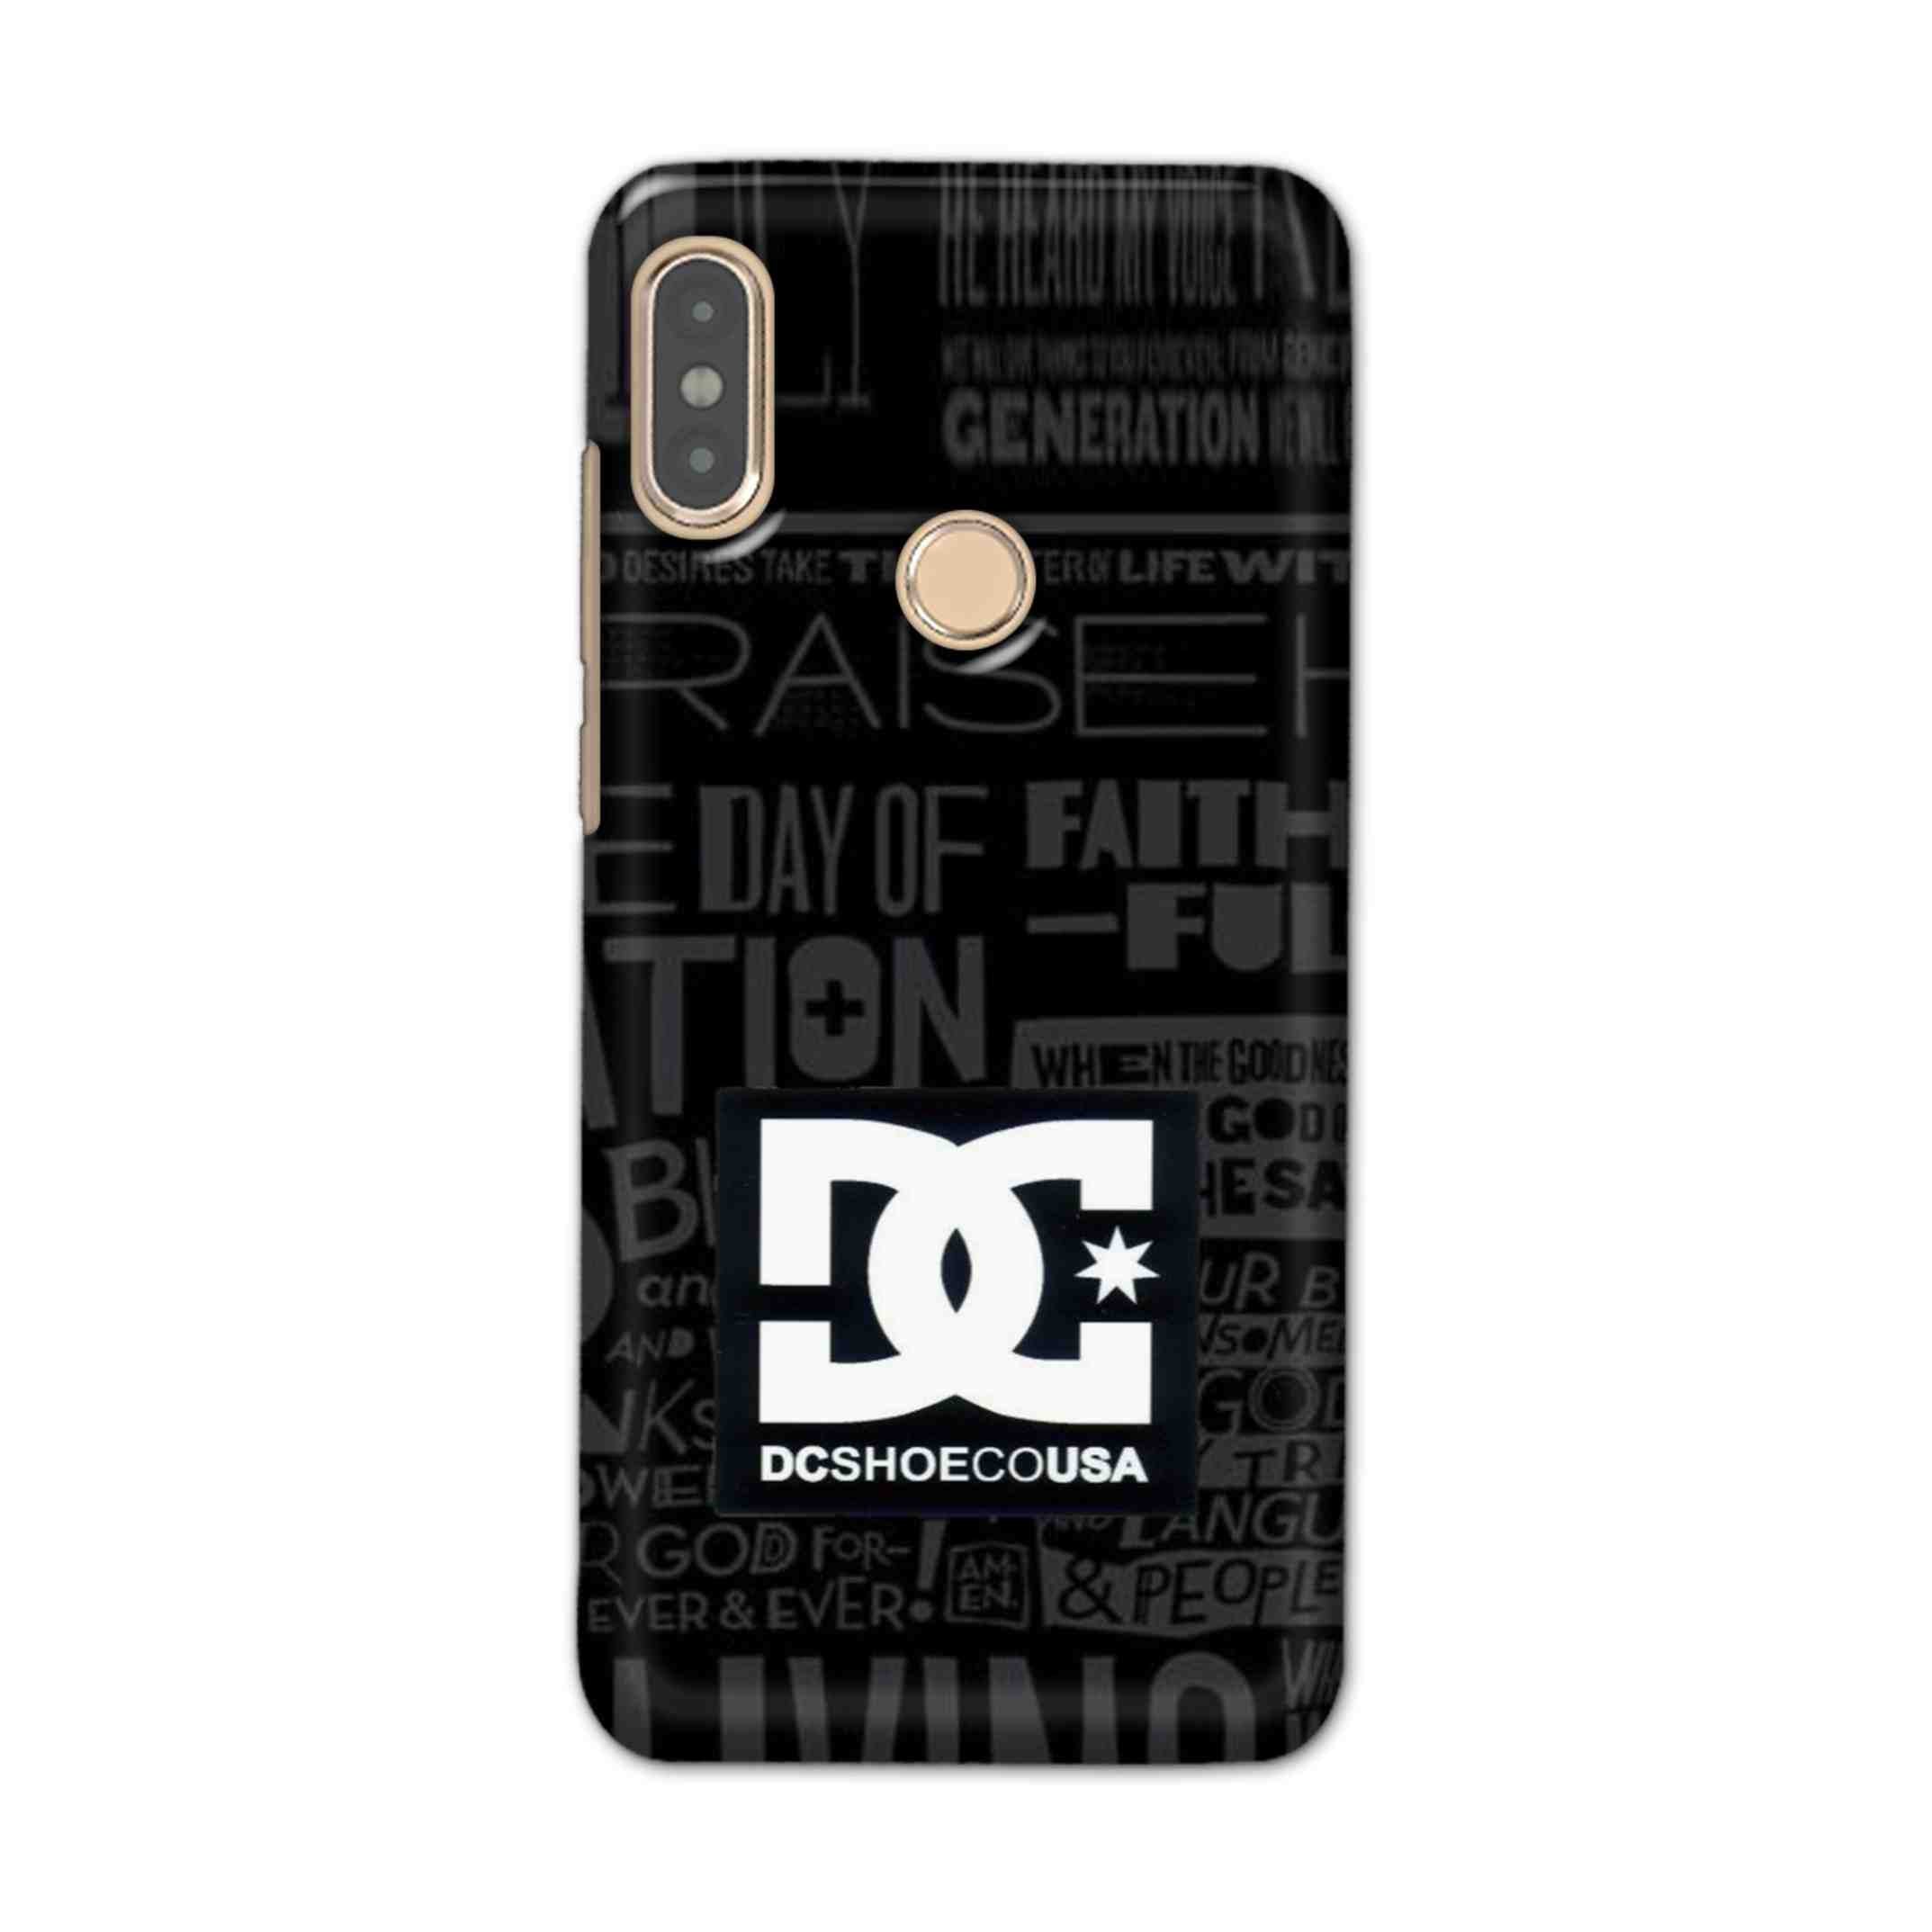 Buy Dc Shoecousa Hard Back Mobile Phone Case Cover For Xiaomi Redmi Note 5 Pro Online